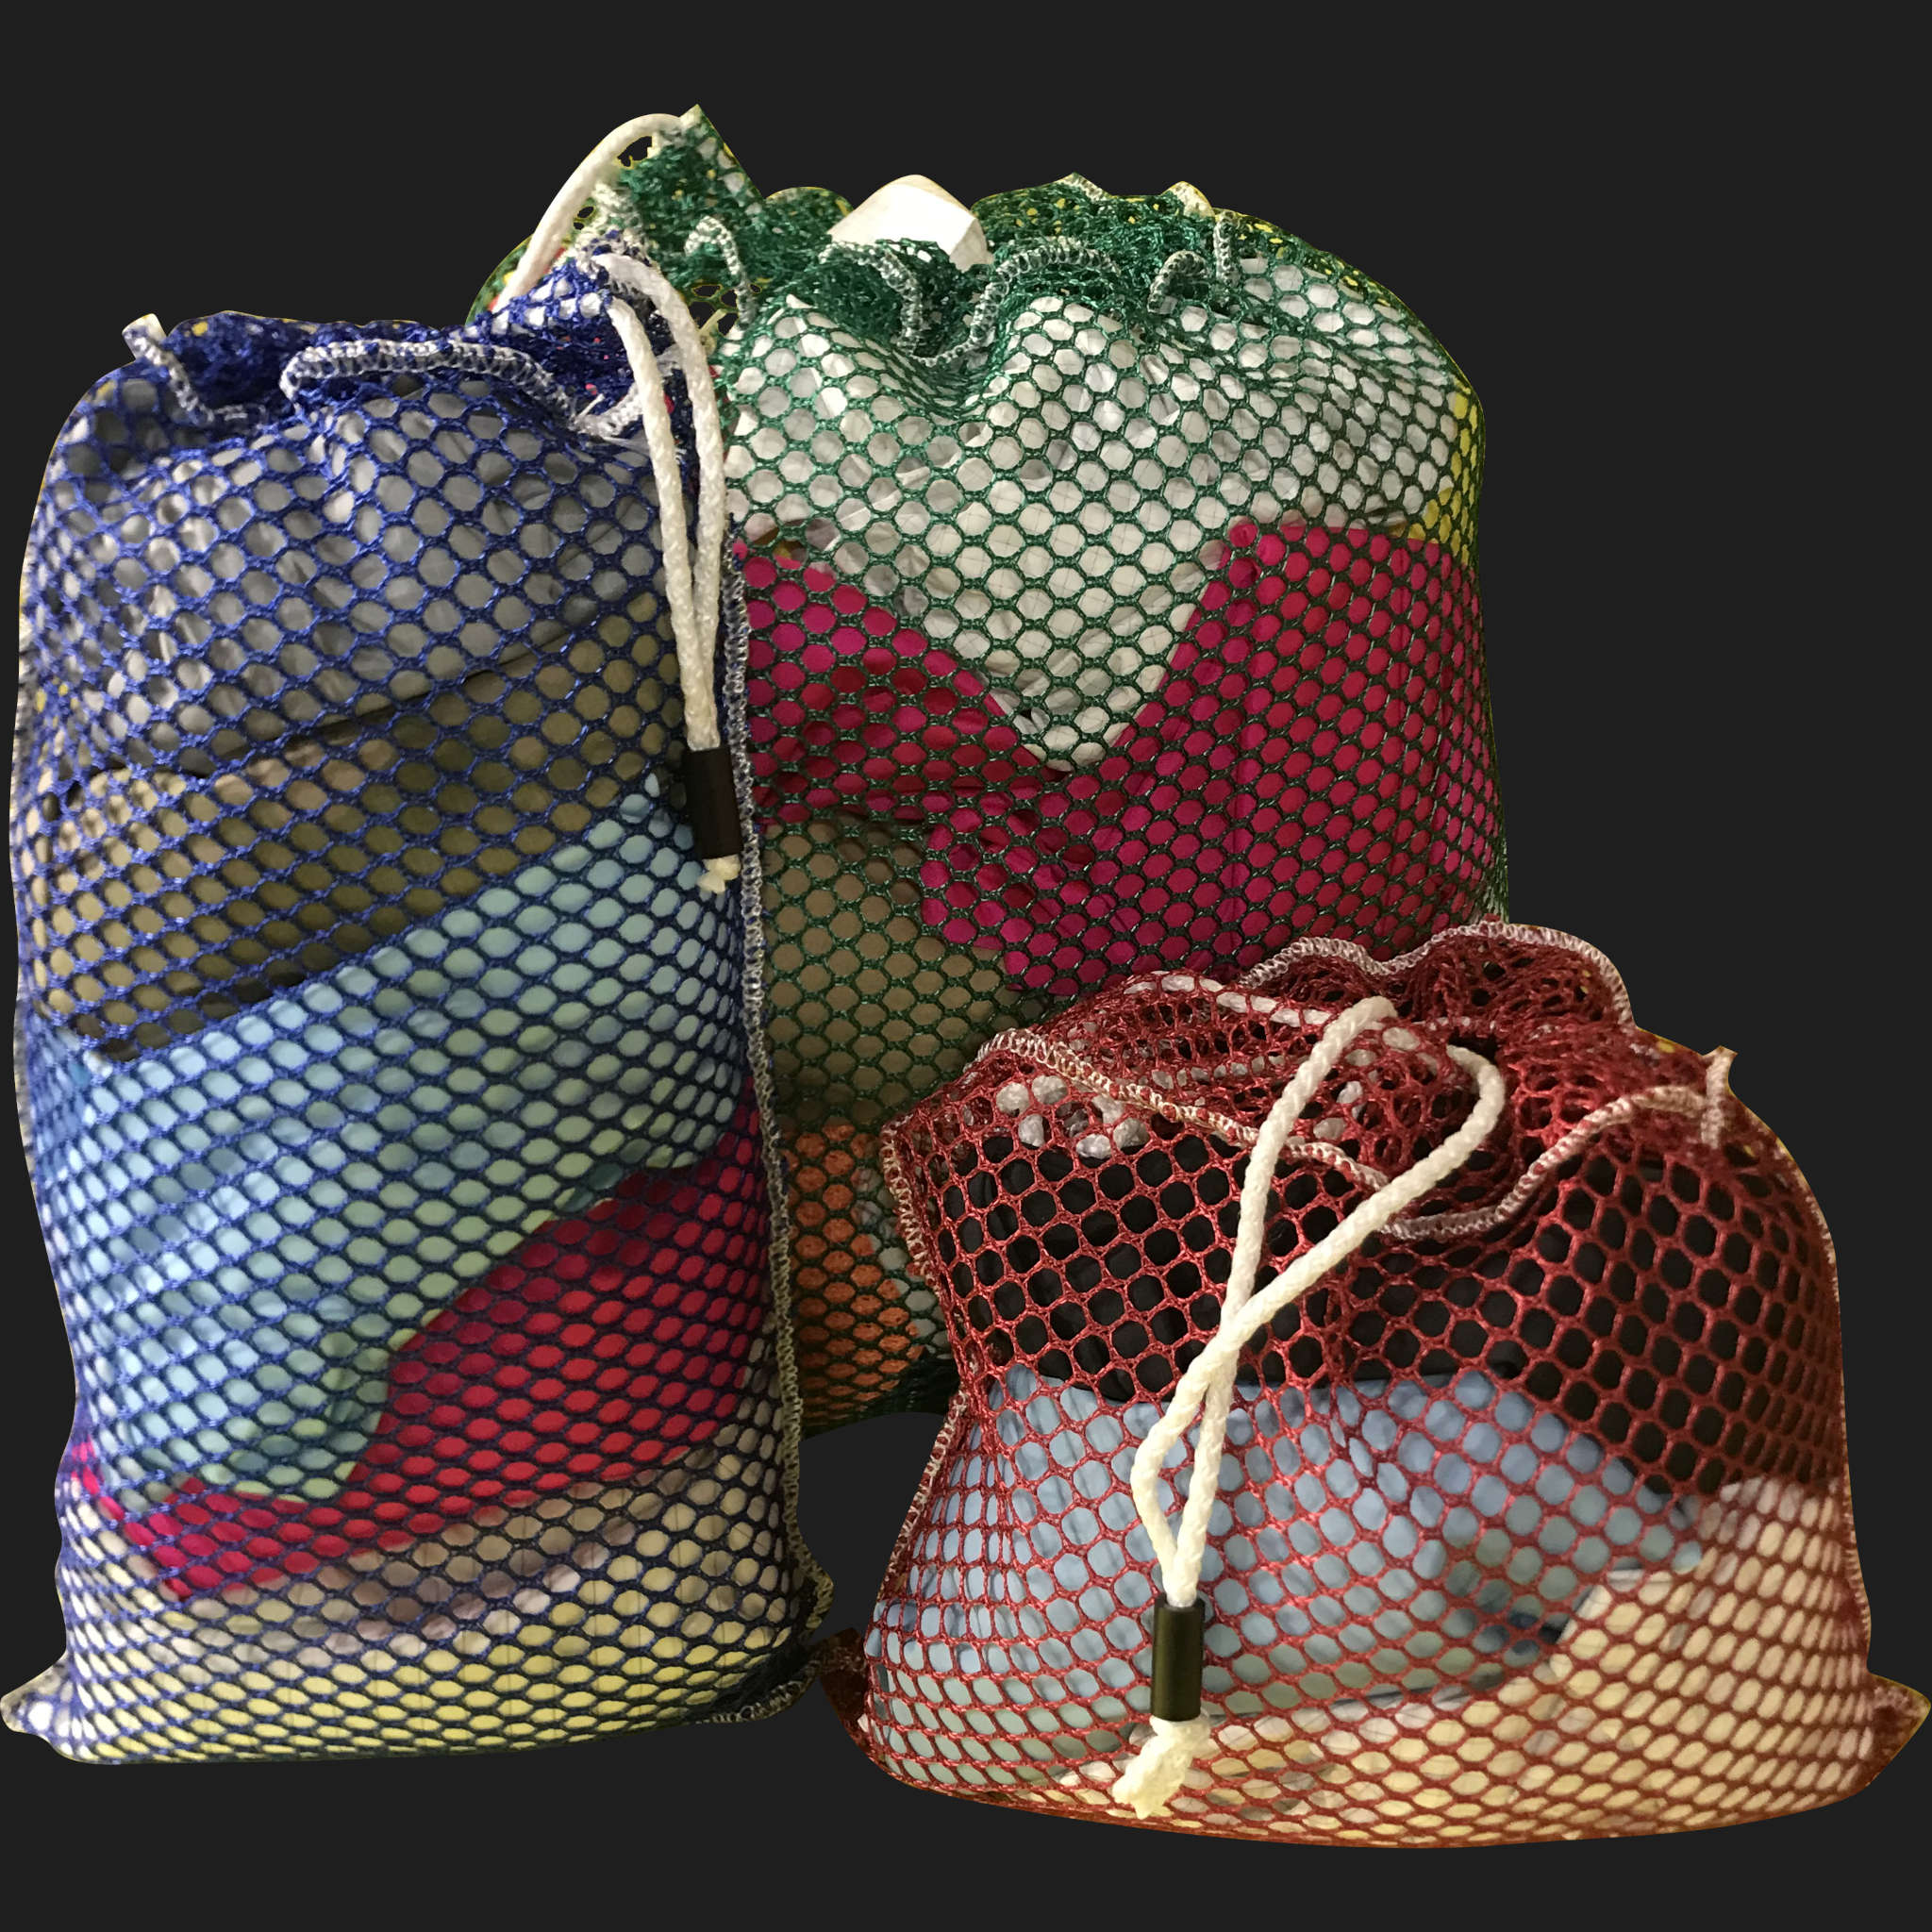 48" x 56" Customized Mesh-Net-Laundry Bags Heavy Duty with Cord and barrellock closure